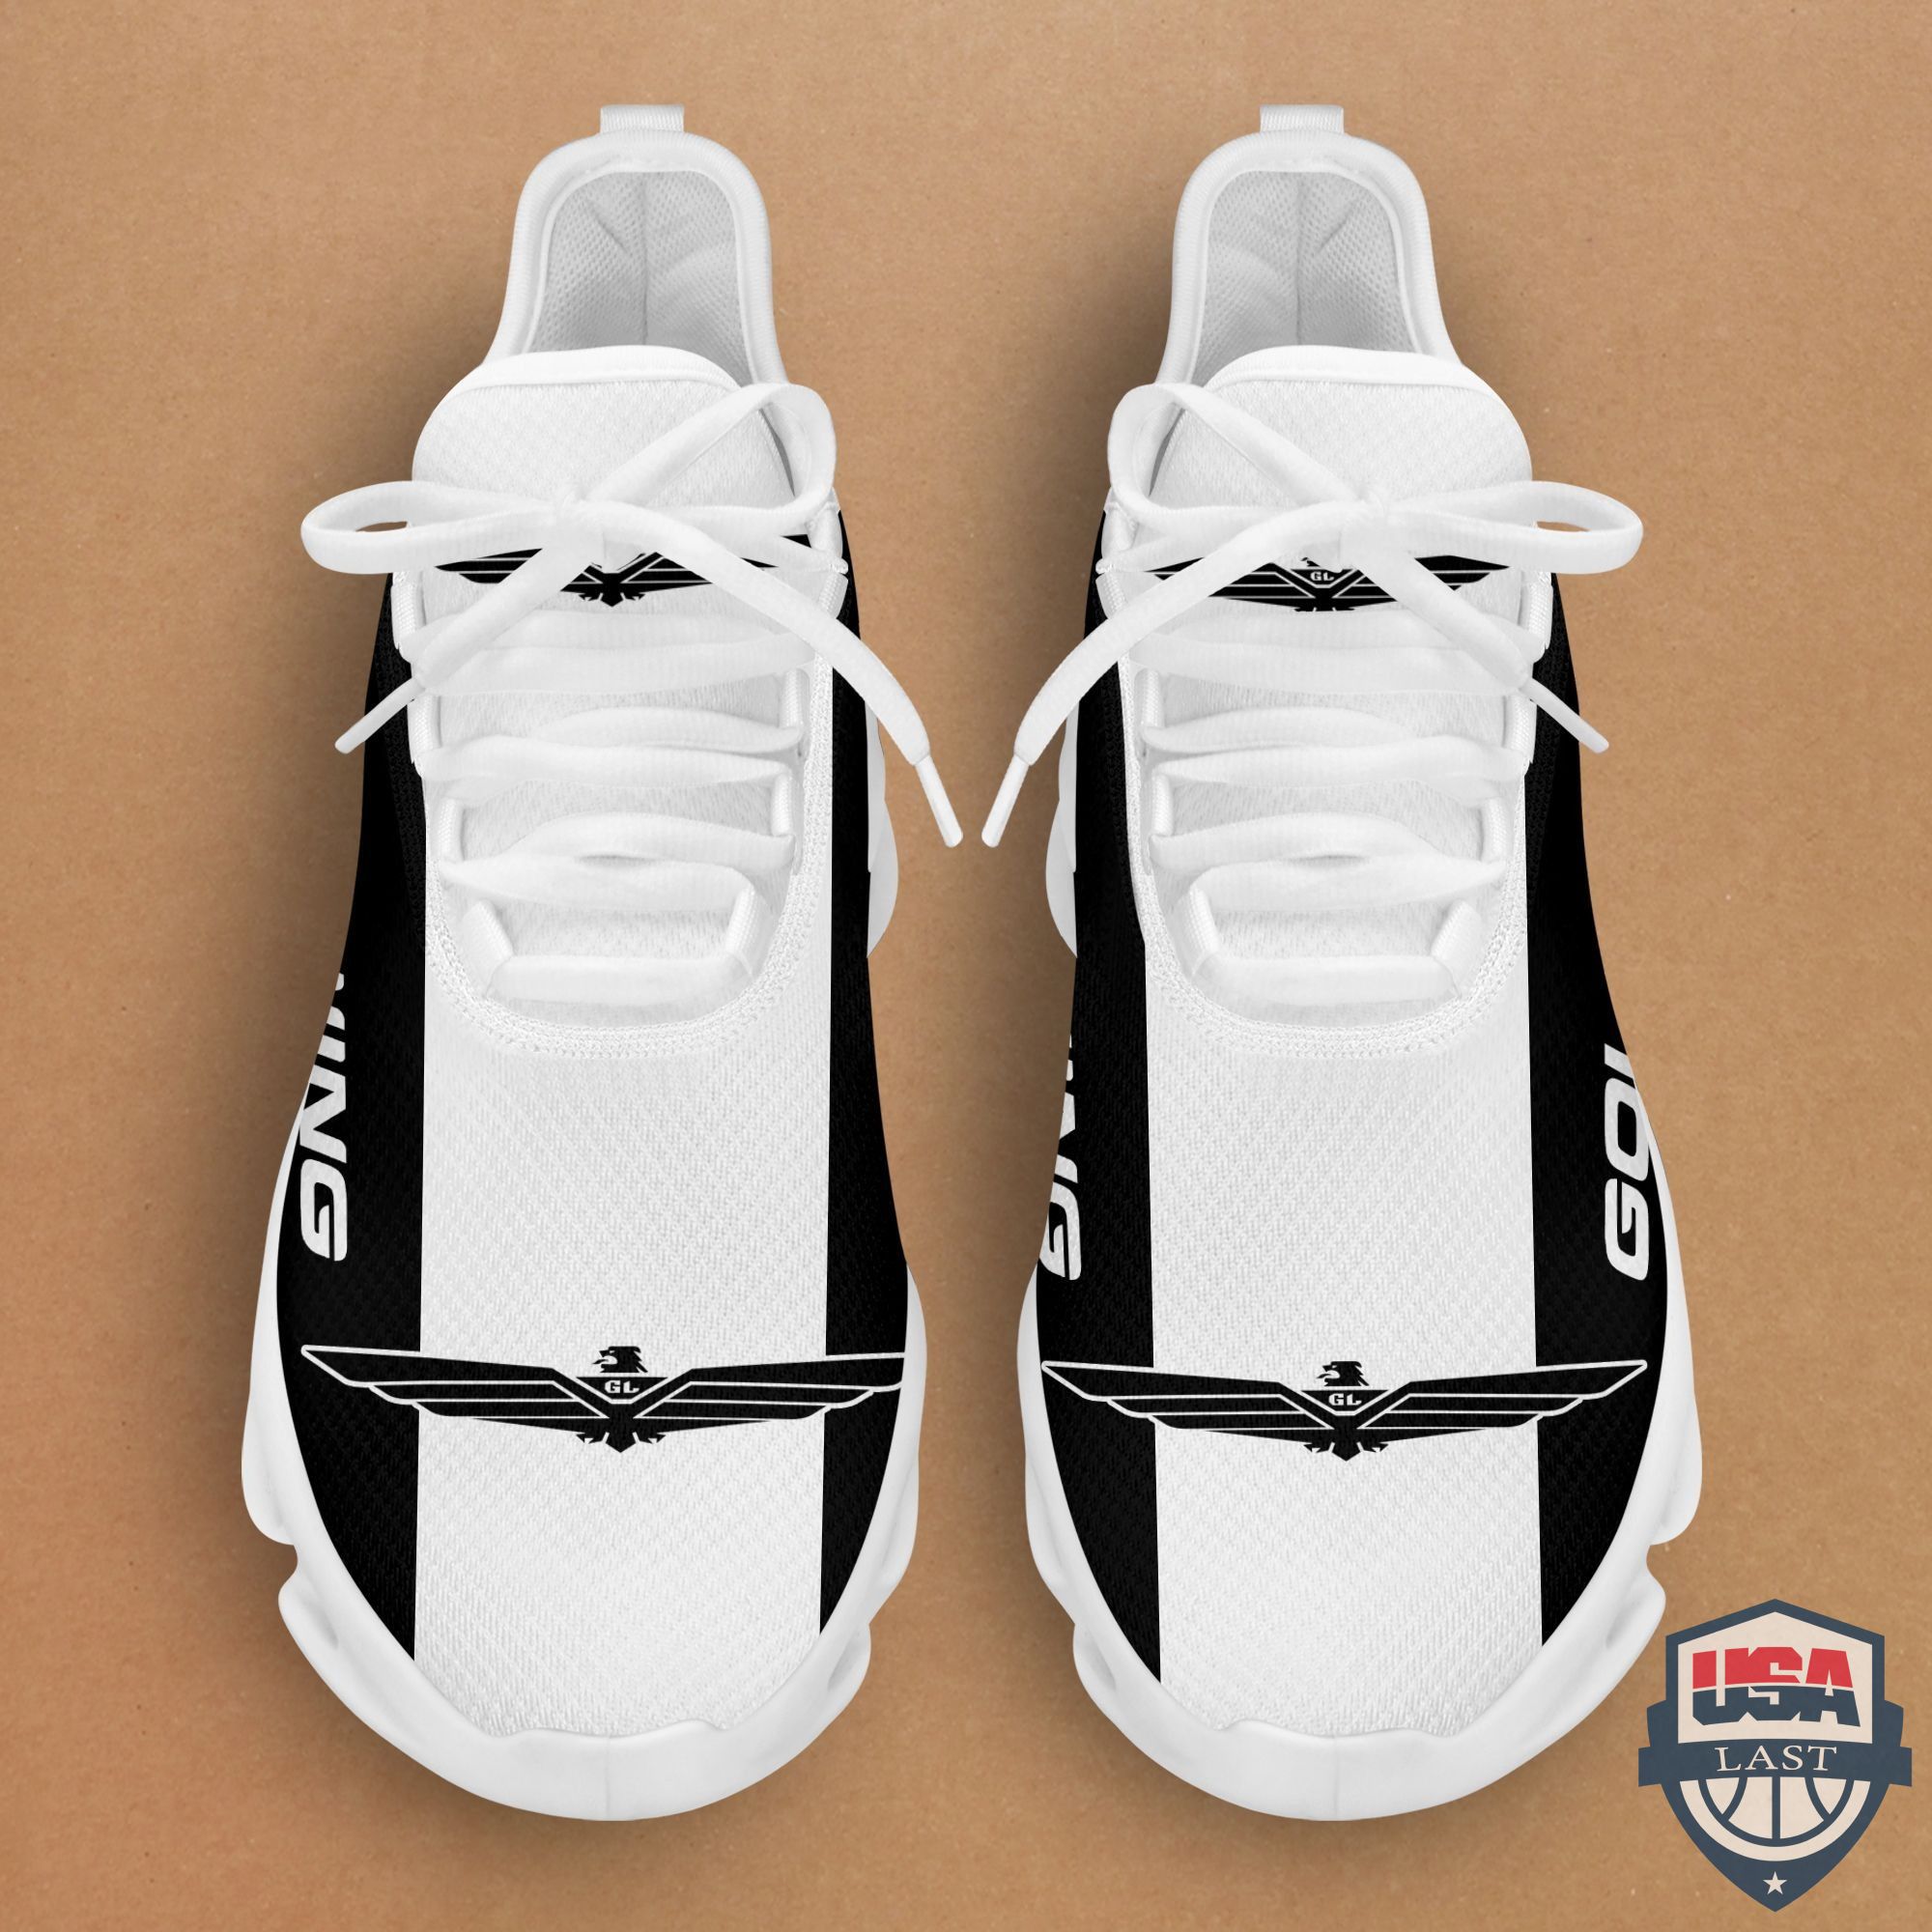 Top Trending – Honda Gold Wing Max Soul Shoes White Version